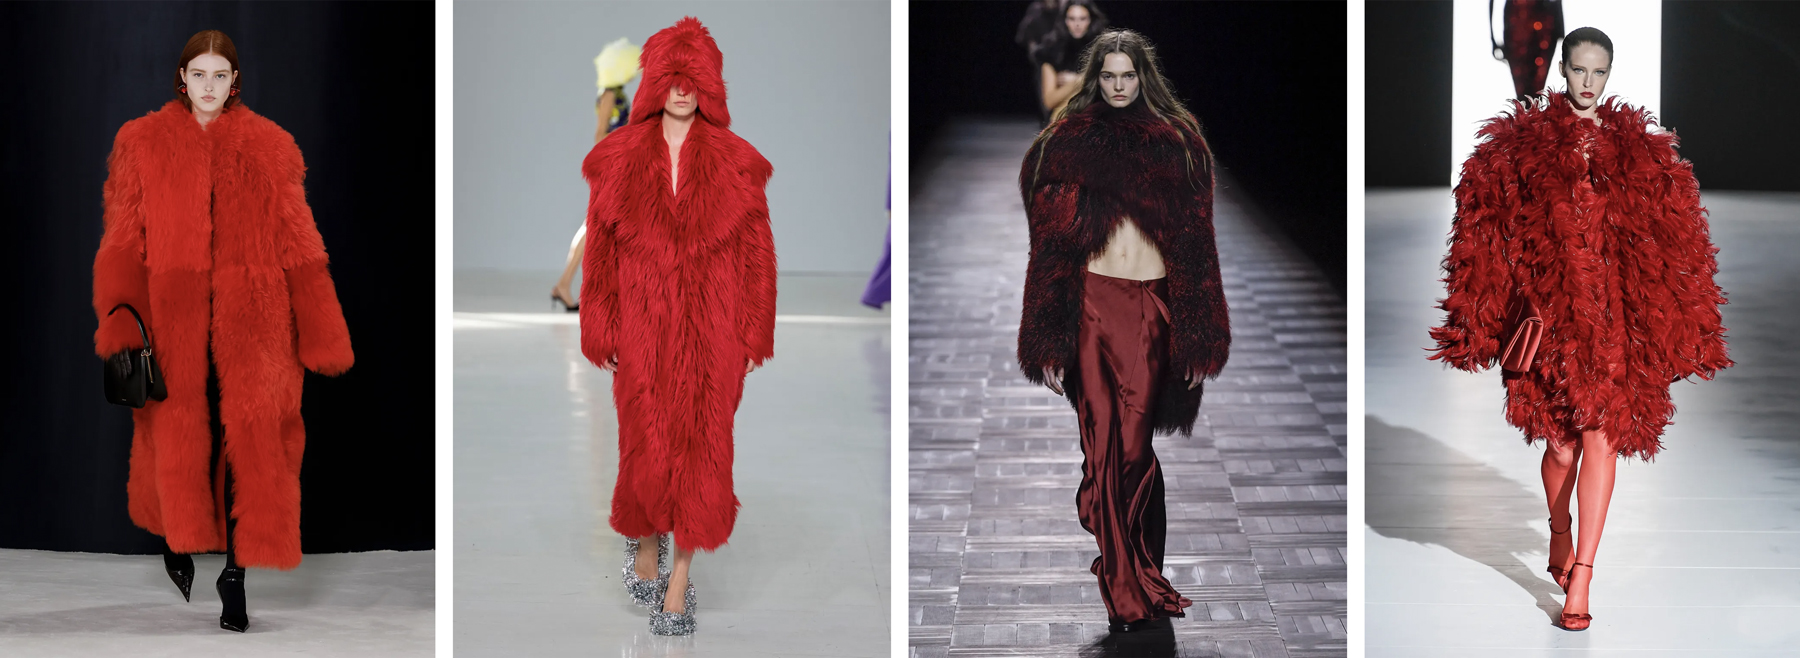 Furry pieces from the FW23 catwalks. From left to right, looks by Maximilian Davis for Ferragamo, MSGM by Massimo Giorgetti, Ann Demeulemeester by Ludovic De Saint Sernin, Dolce&Gabbana